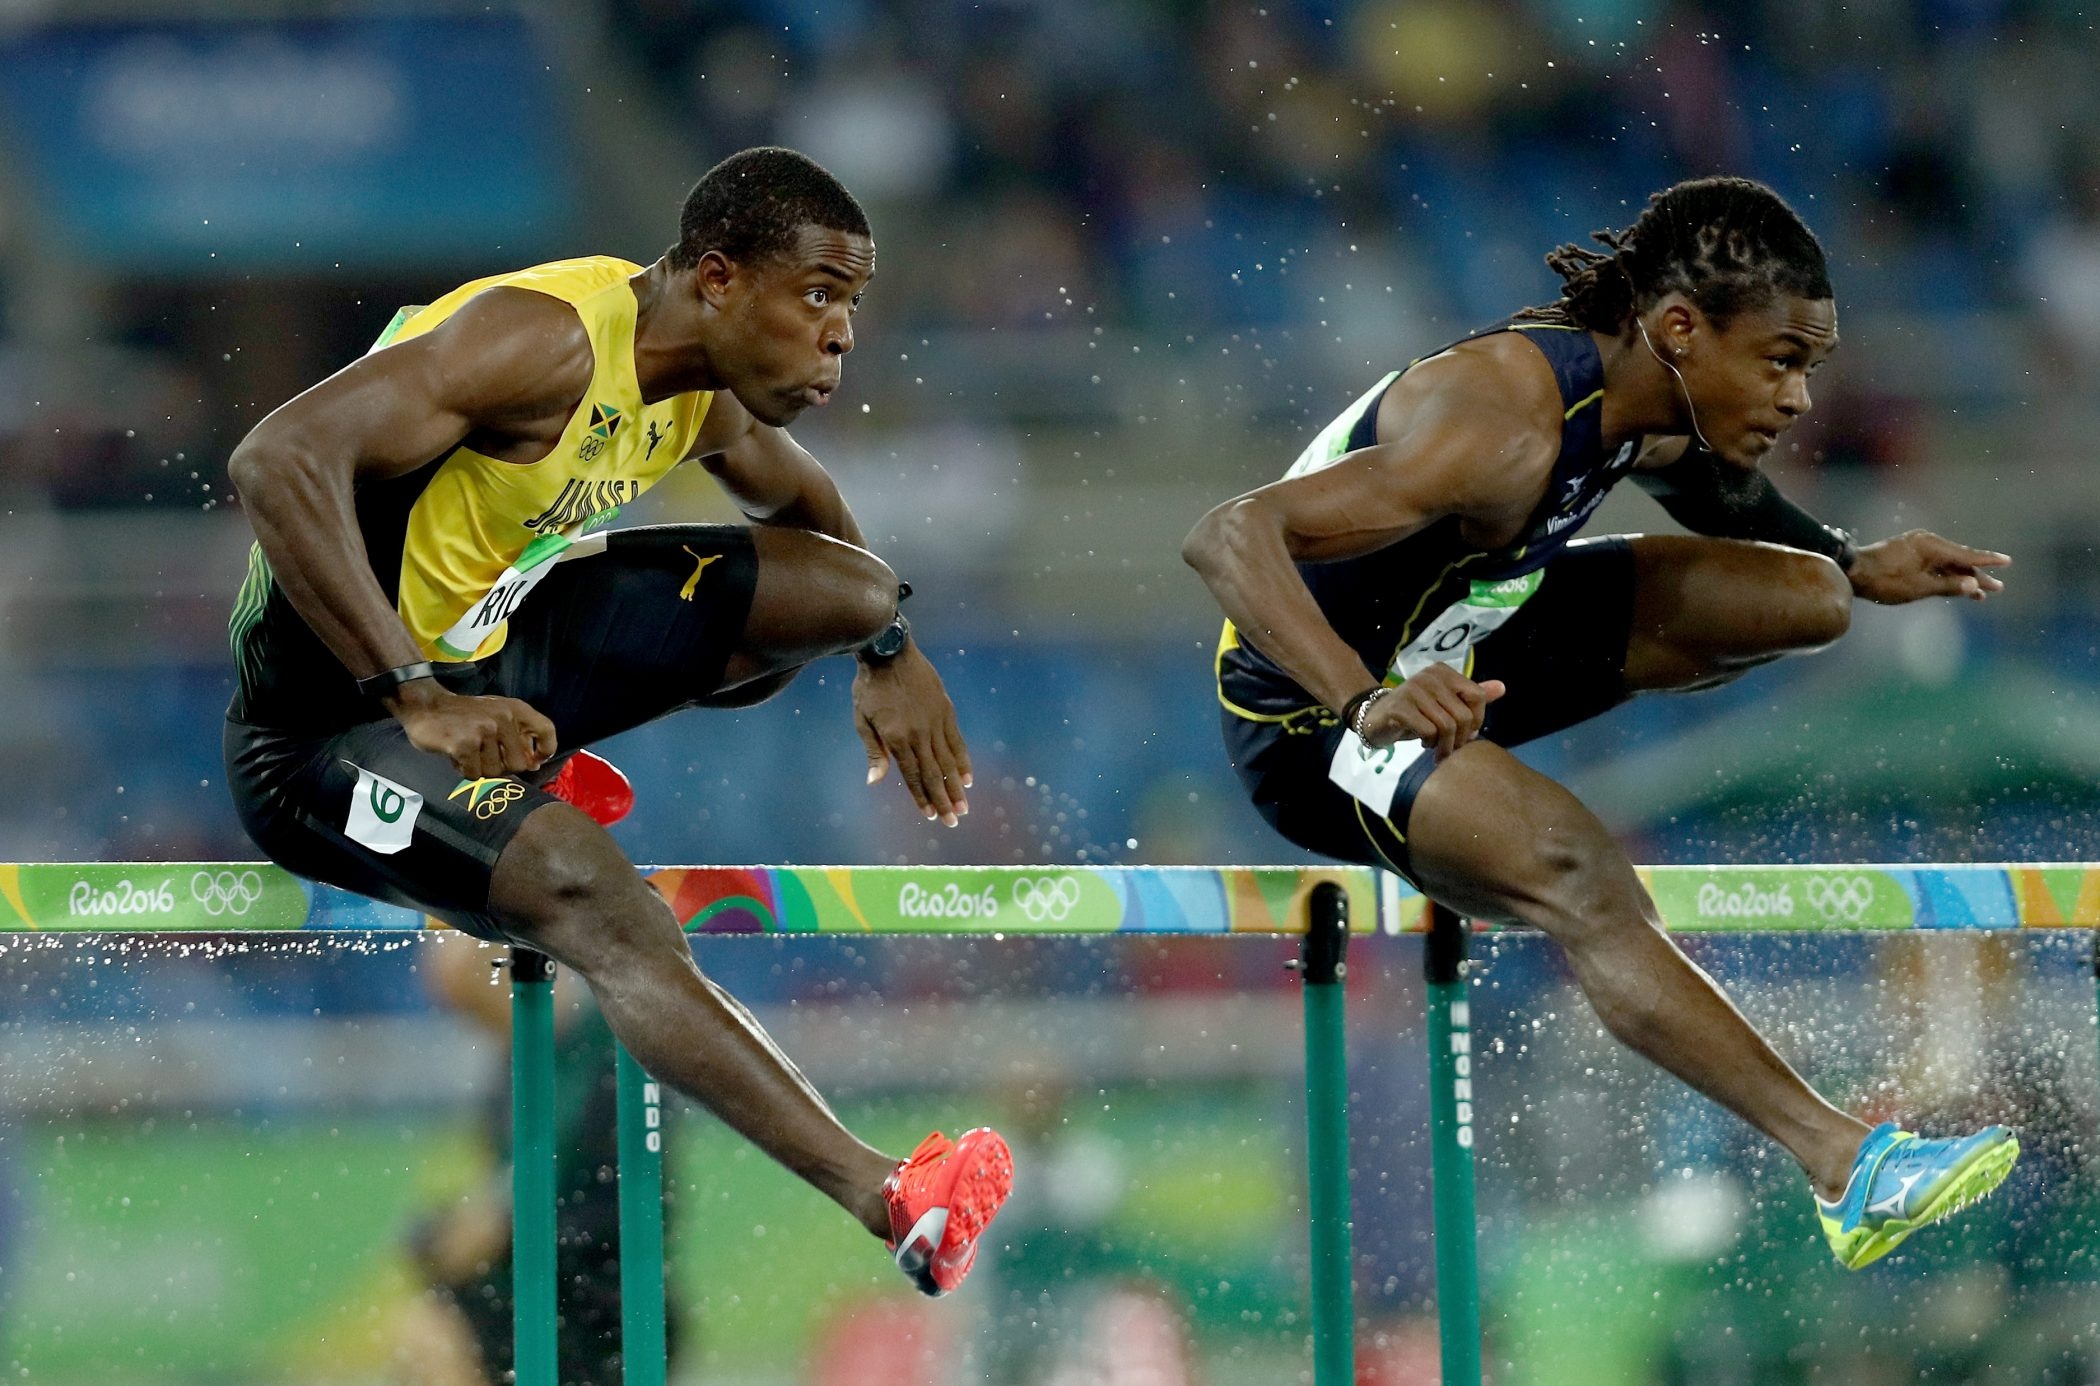 Hurdling: Rio 2016 Summer Olympics, Running competition, The sport of racing over hurdles. 2100x1390 HD Background.